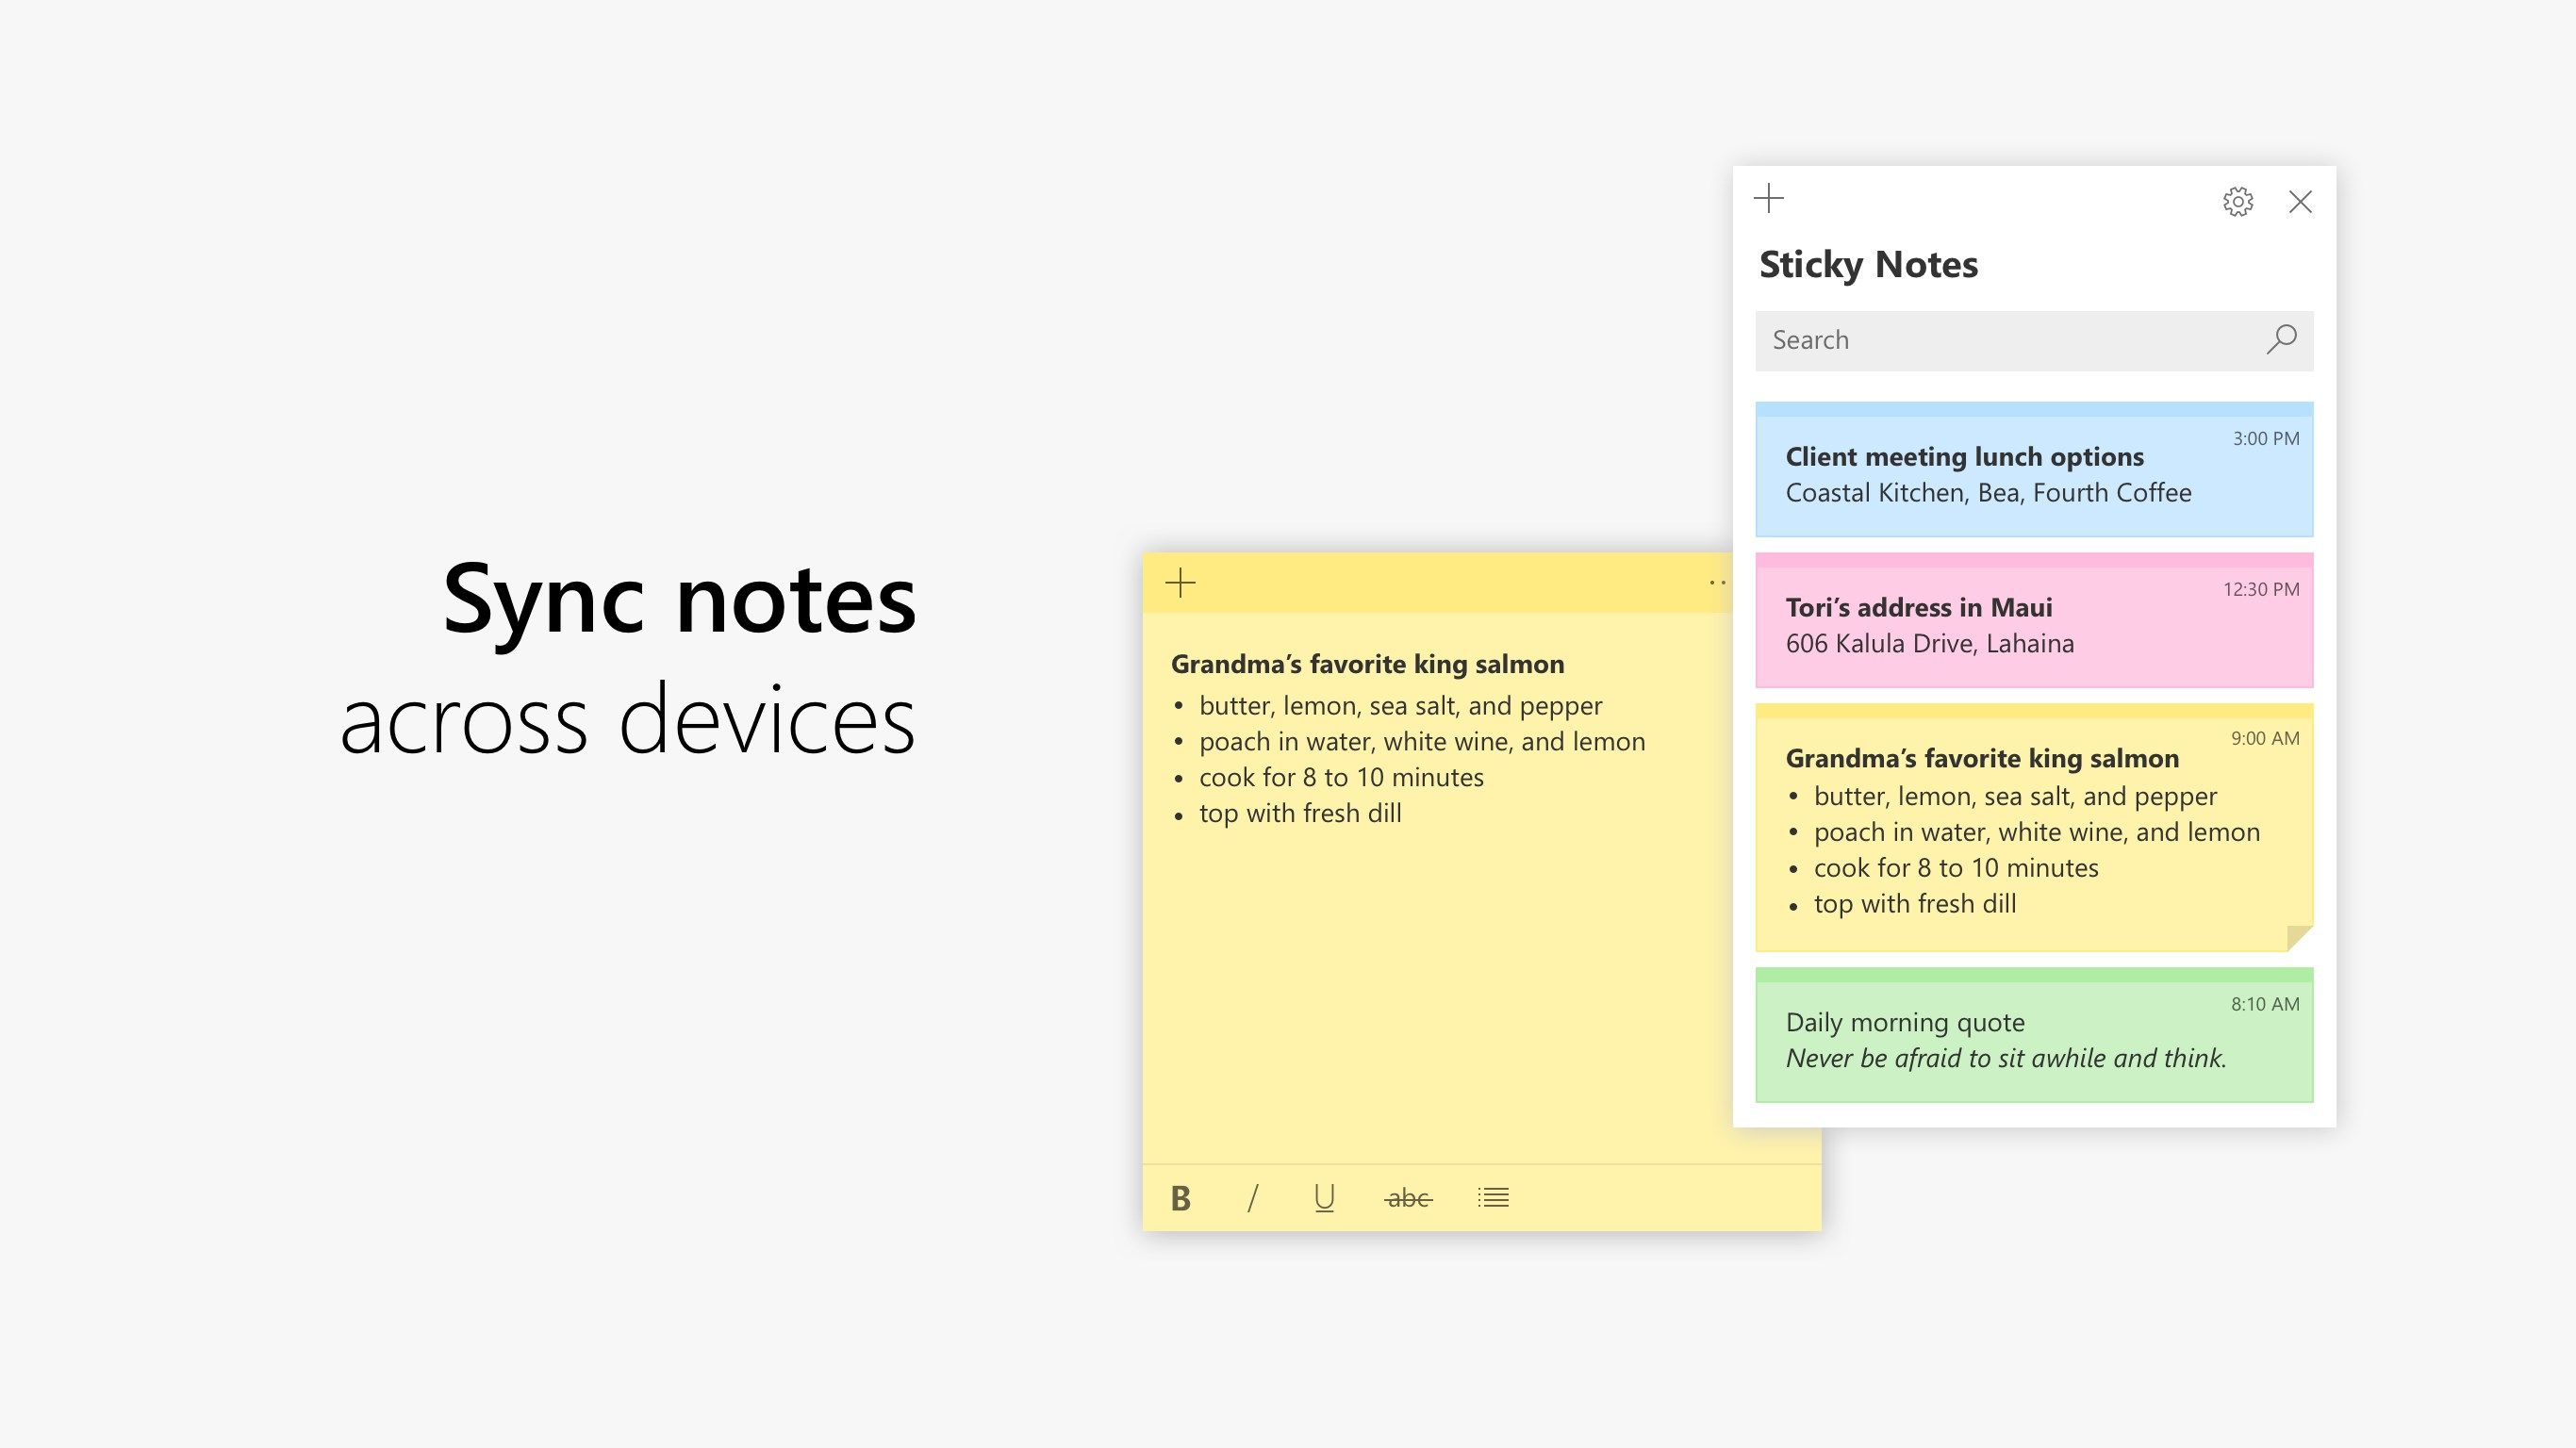 Sync notes across devices